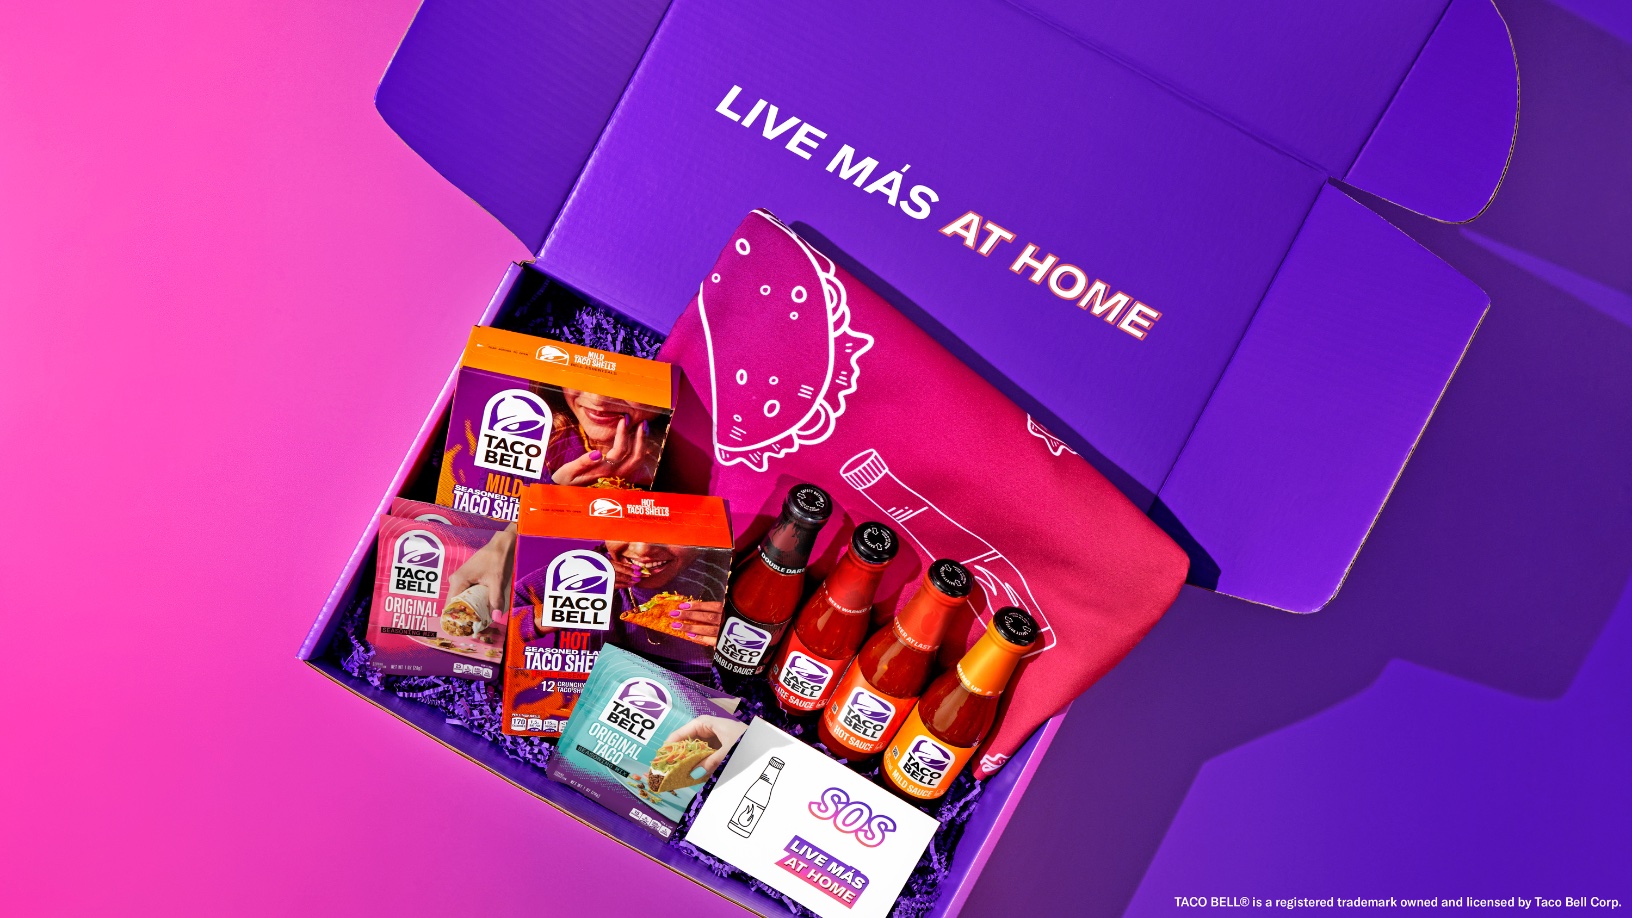 Taco Bell at Home Debuts First Campaign To Help Students Live Mas at Home